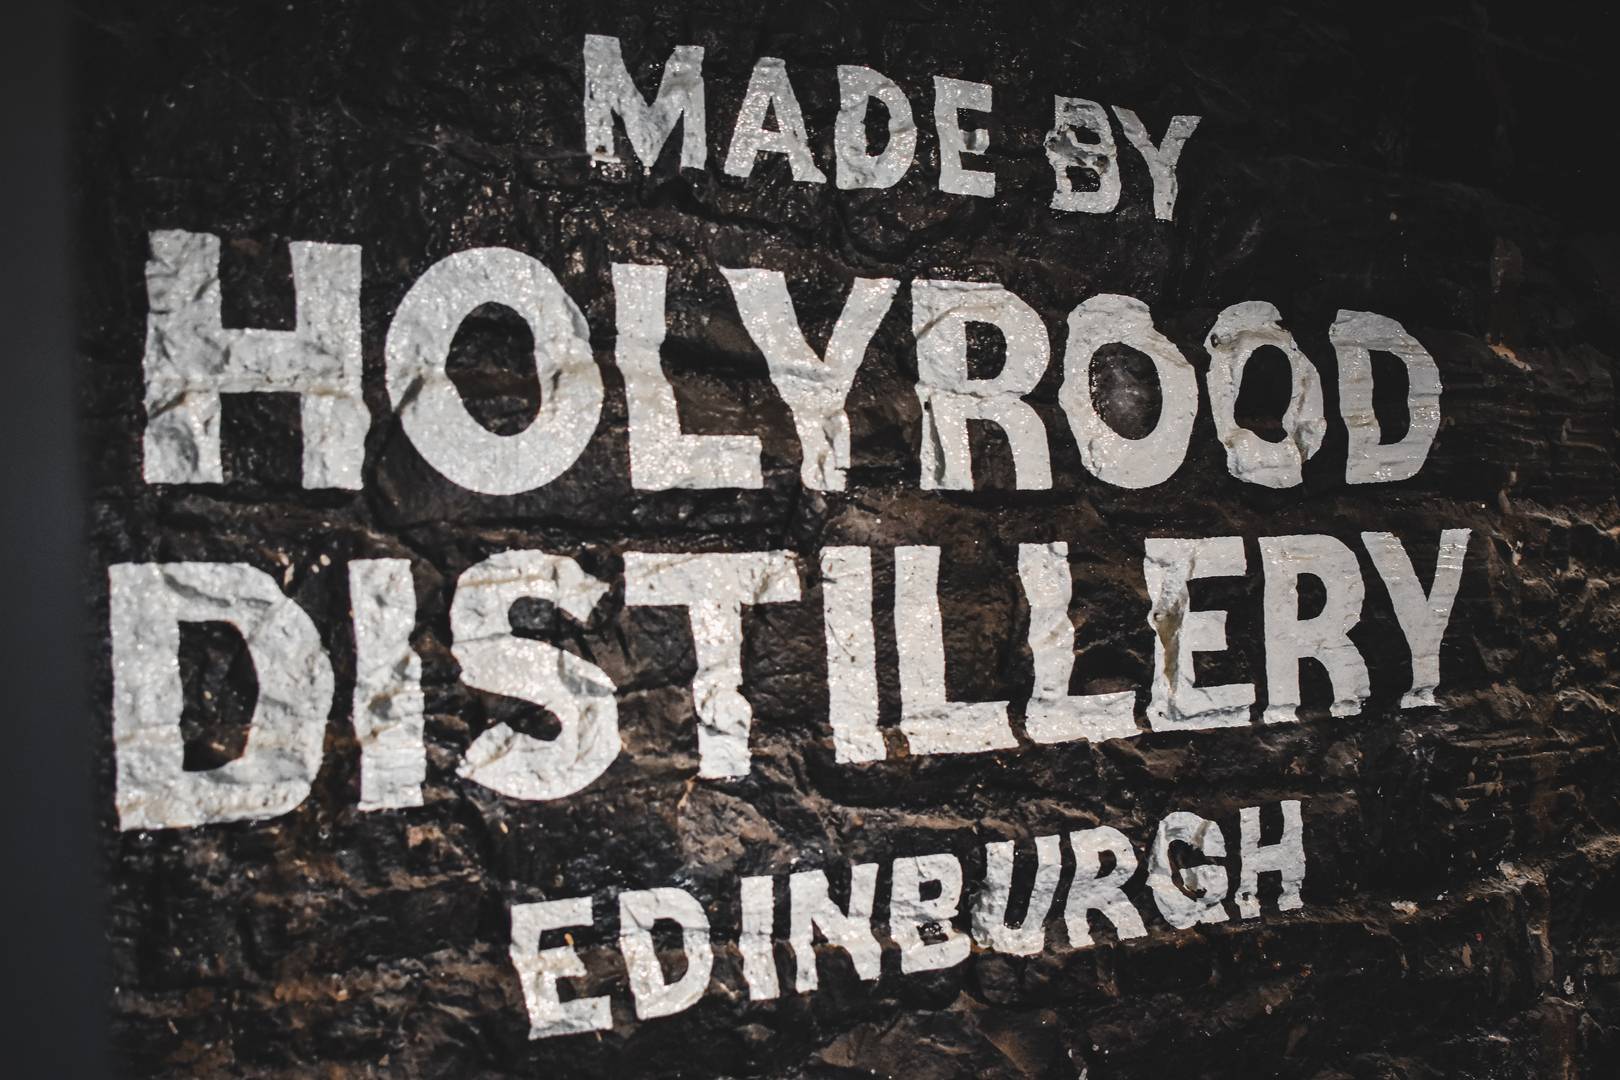 Made by Holyrood Distillery Sign